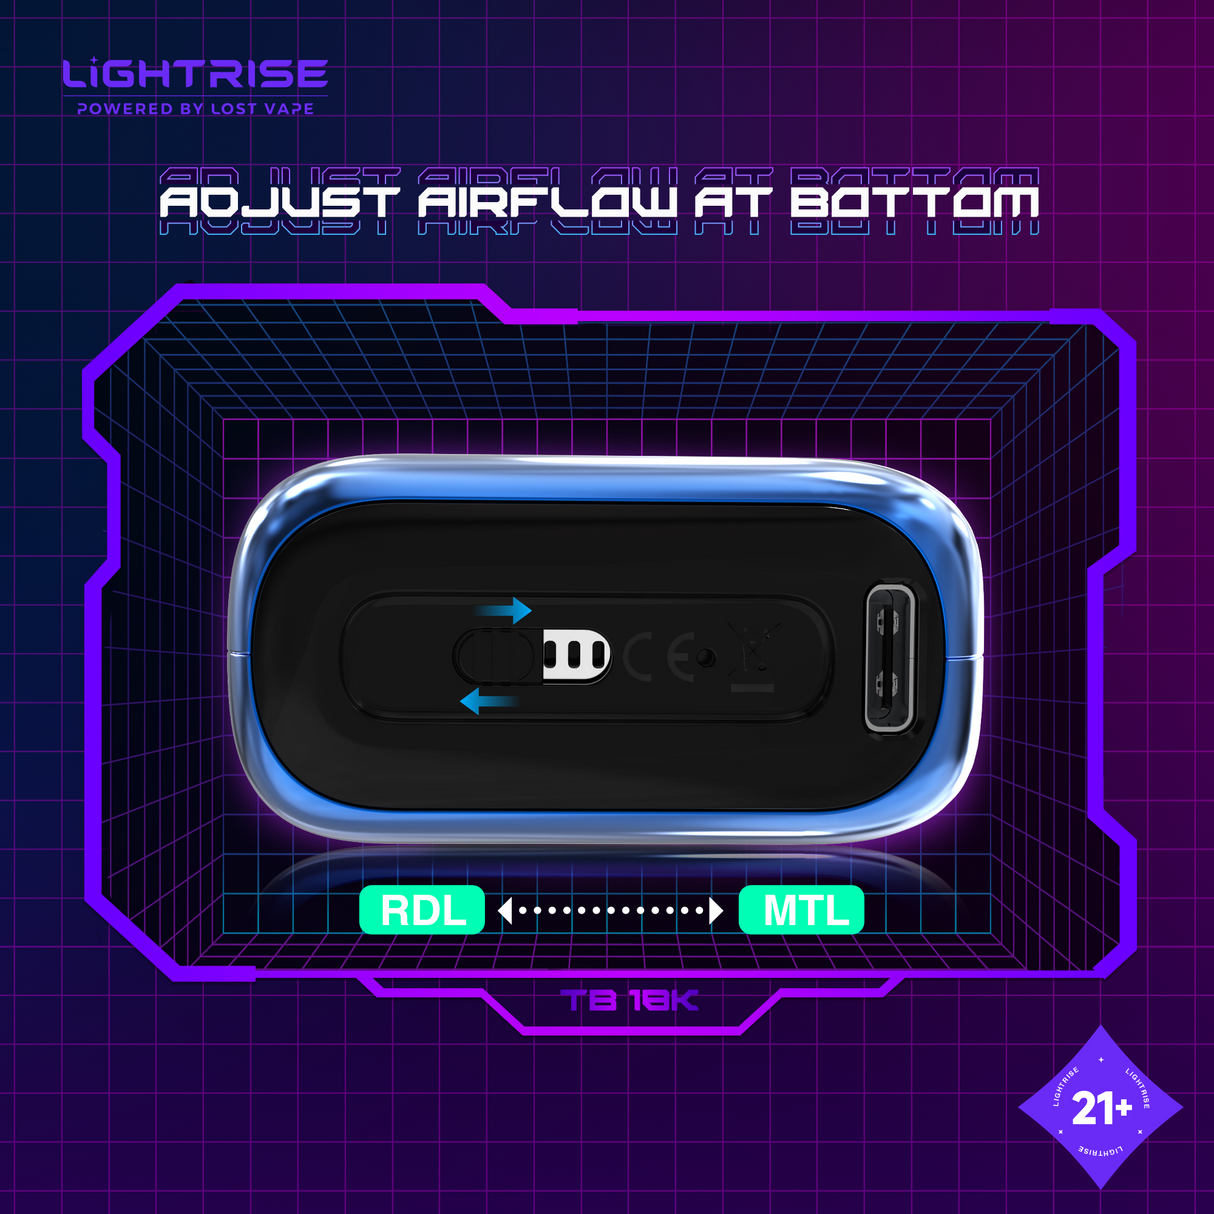 LIGHTRISE TB 18K Powered By Lost Vape details_4